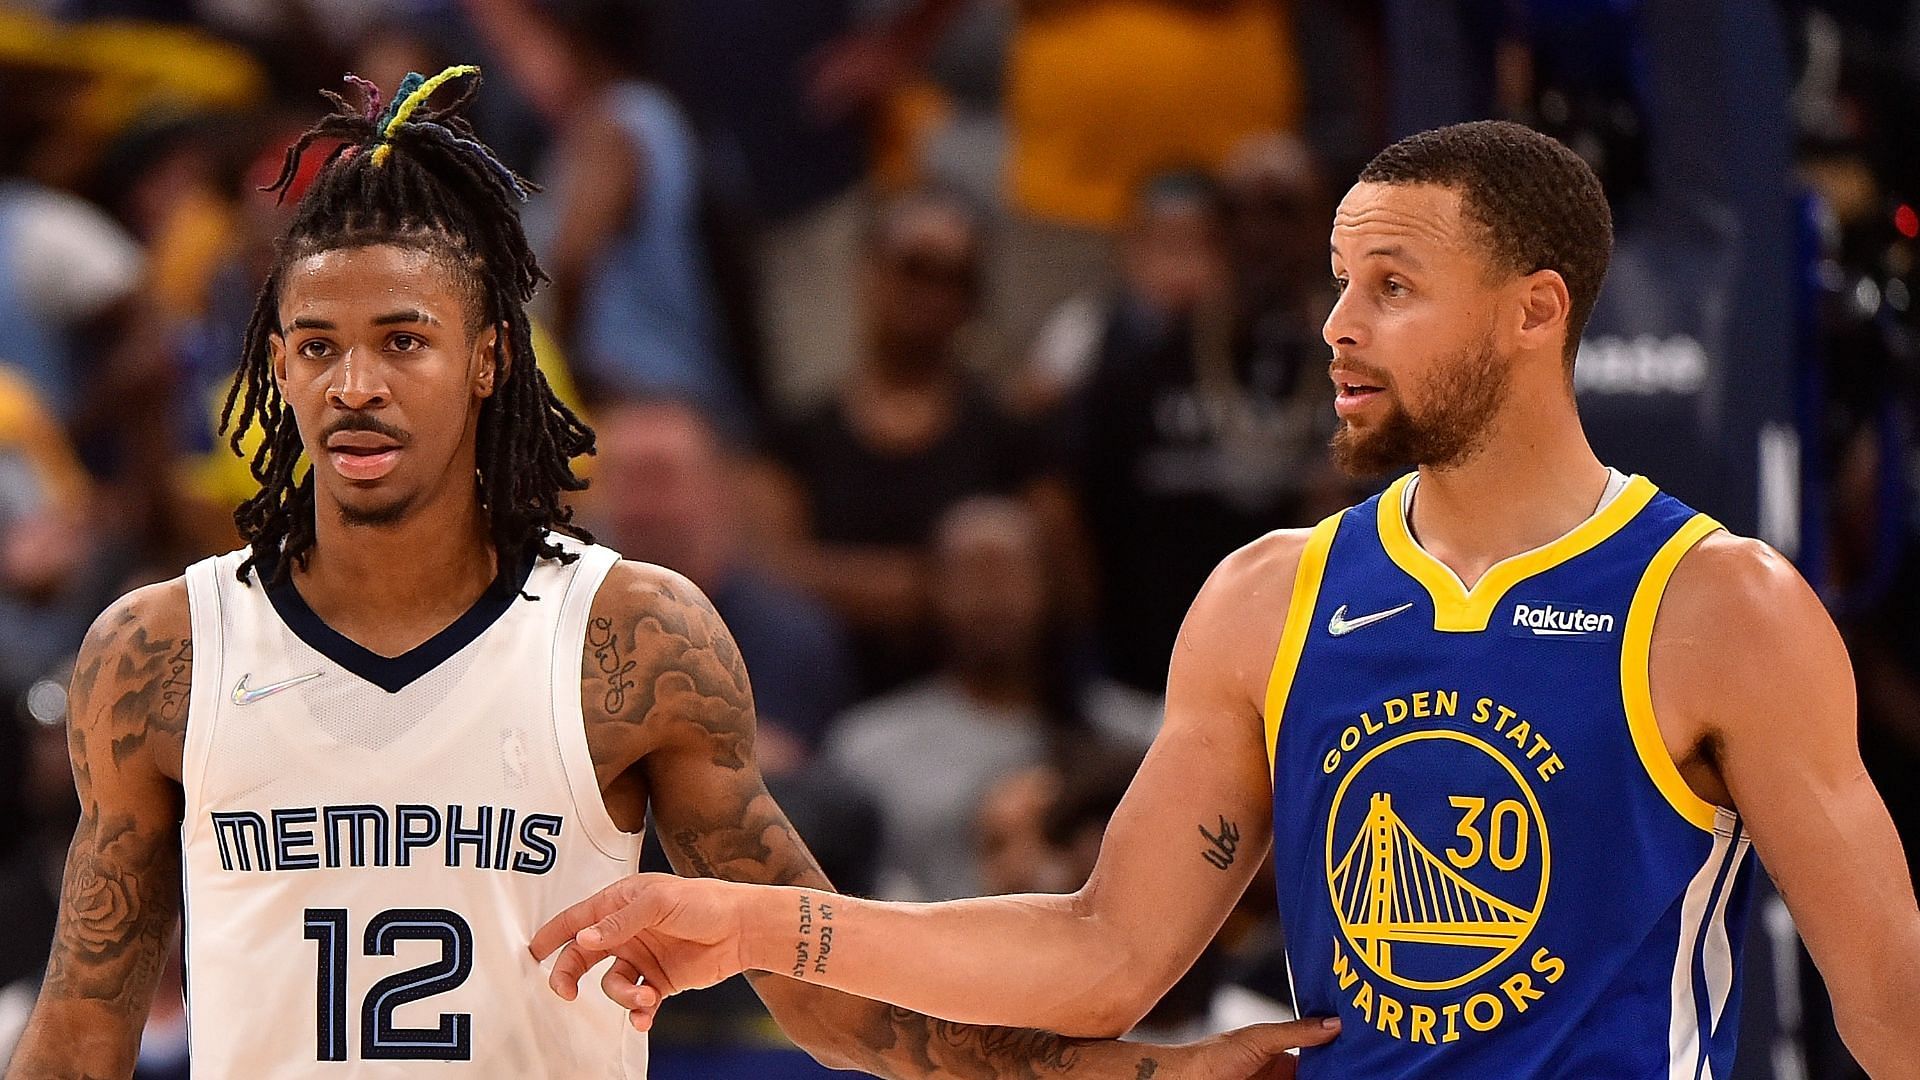 Steph Curry of the Golden State Warriors along with Ja Morant of the Memphis Grizzlies